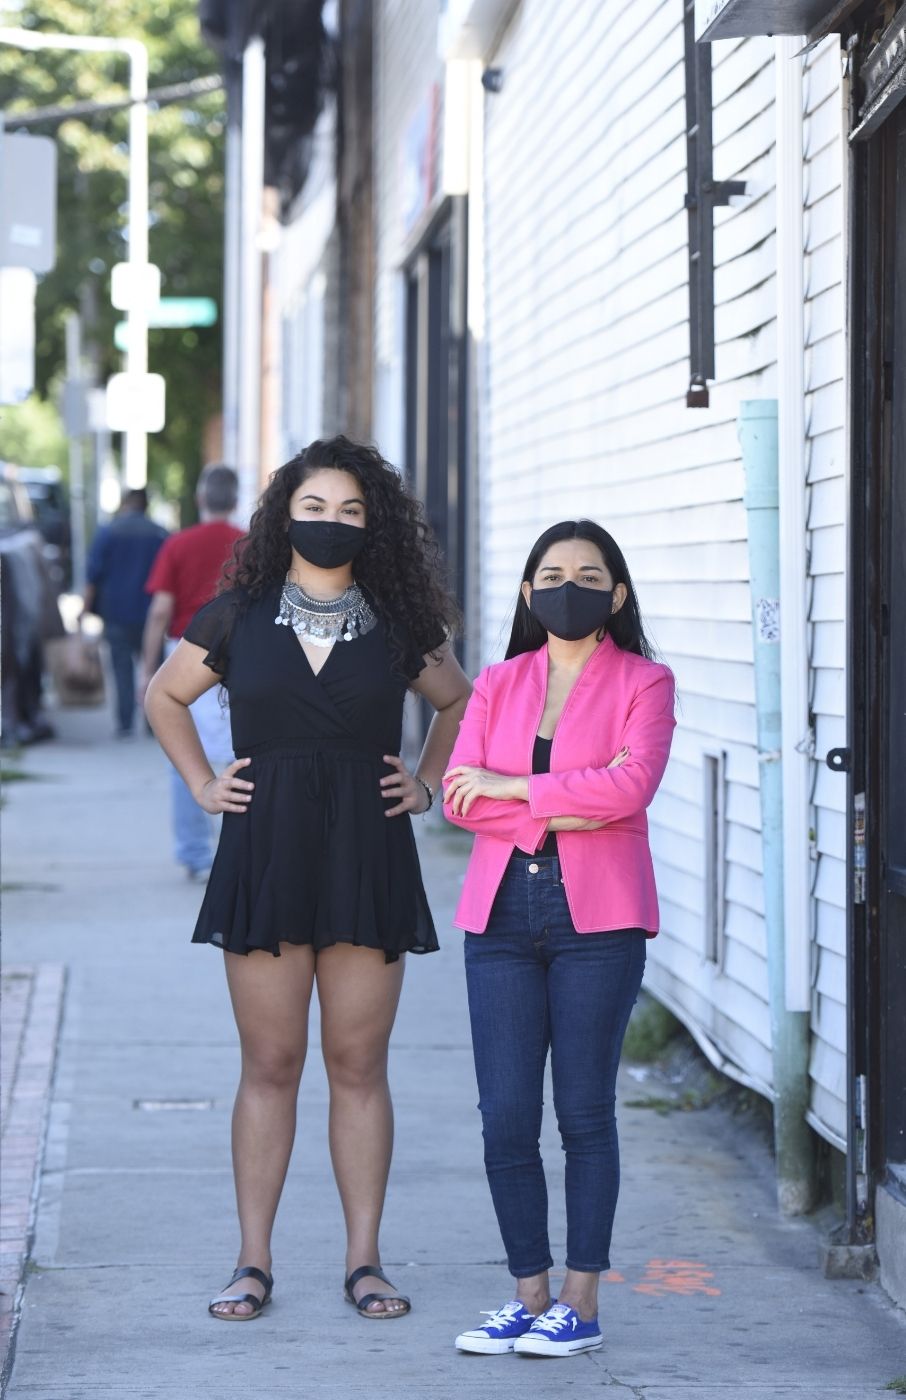 Alexa Cuellar and Patricia Montes standing next to each other. They're both wearing black face masks. Alexa is wearing a short-sleeved black romper and a turquoise necklace, hands on her hips. Patricia is wearing a pink blazer and blue jeans, arms crossed. They're standing on a sidewalk. Behind them to the right is a long white building with siding. Trees and a street sign in the far background.